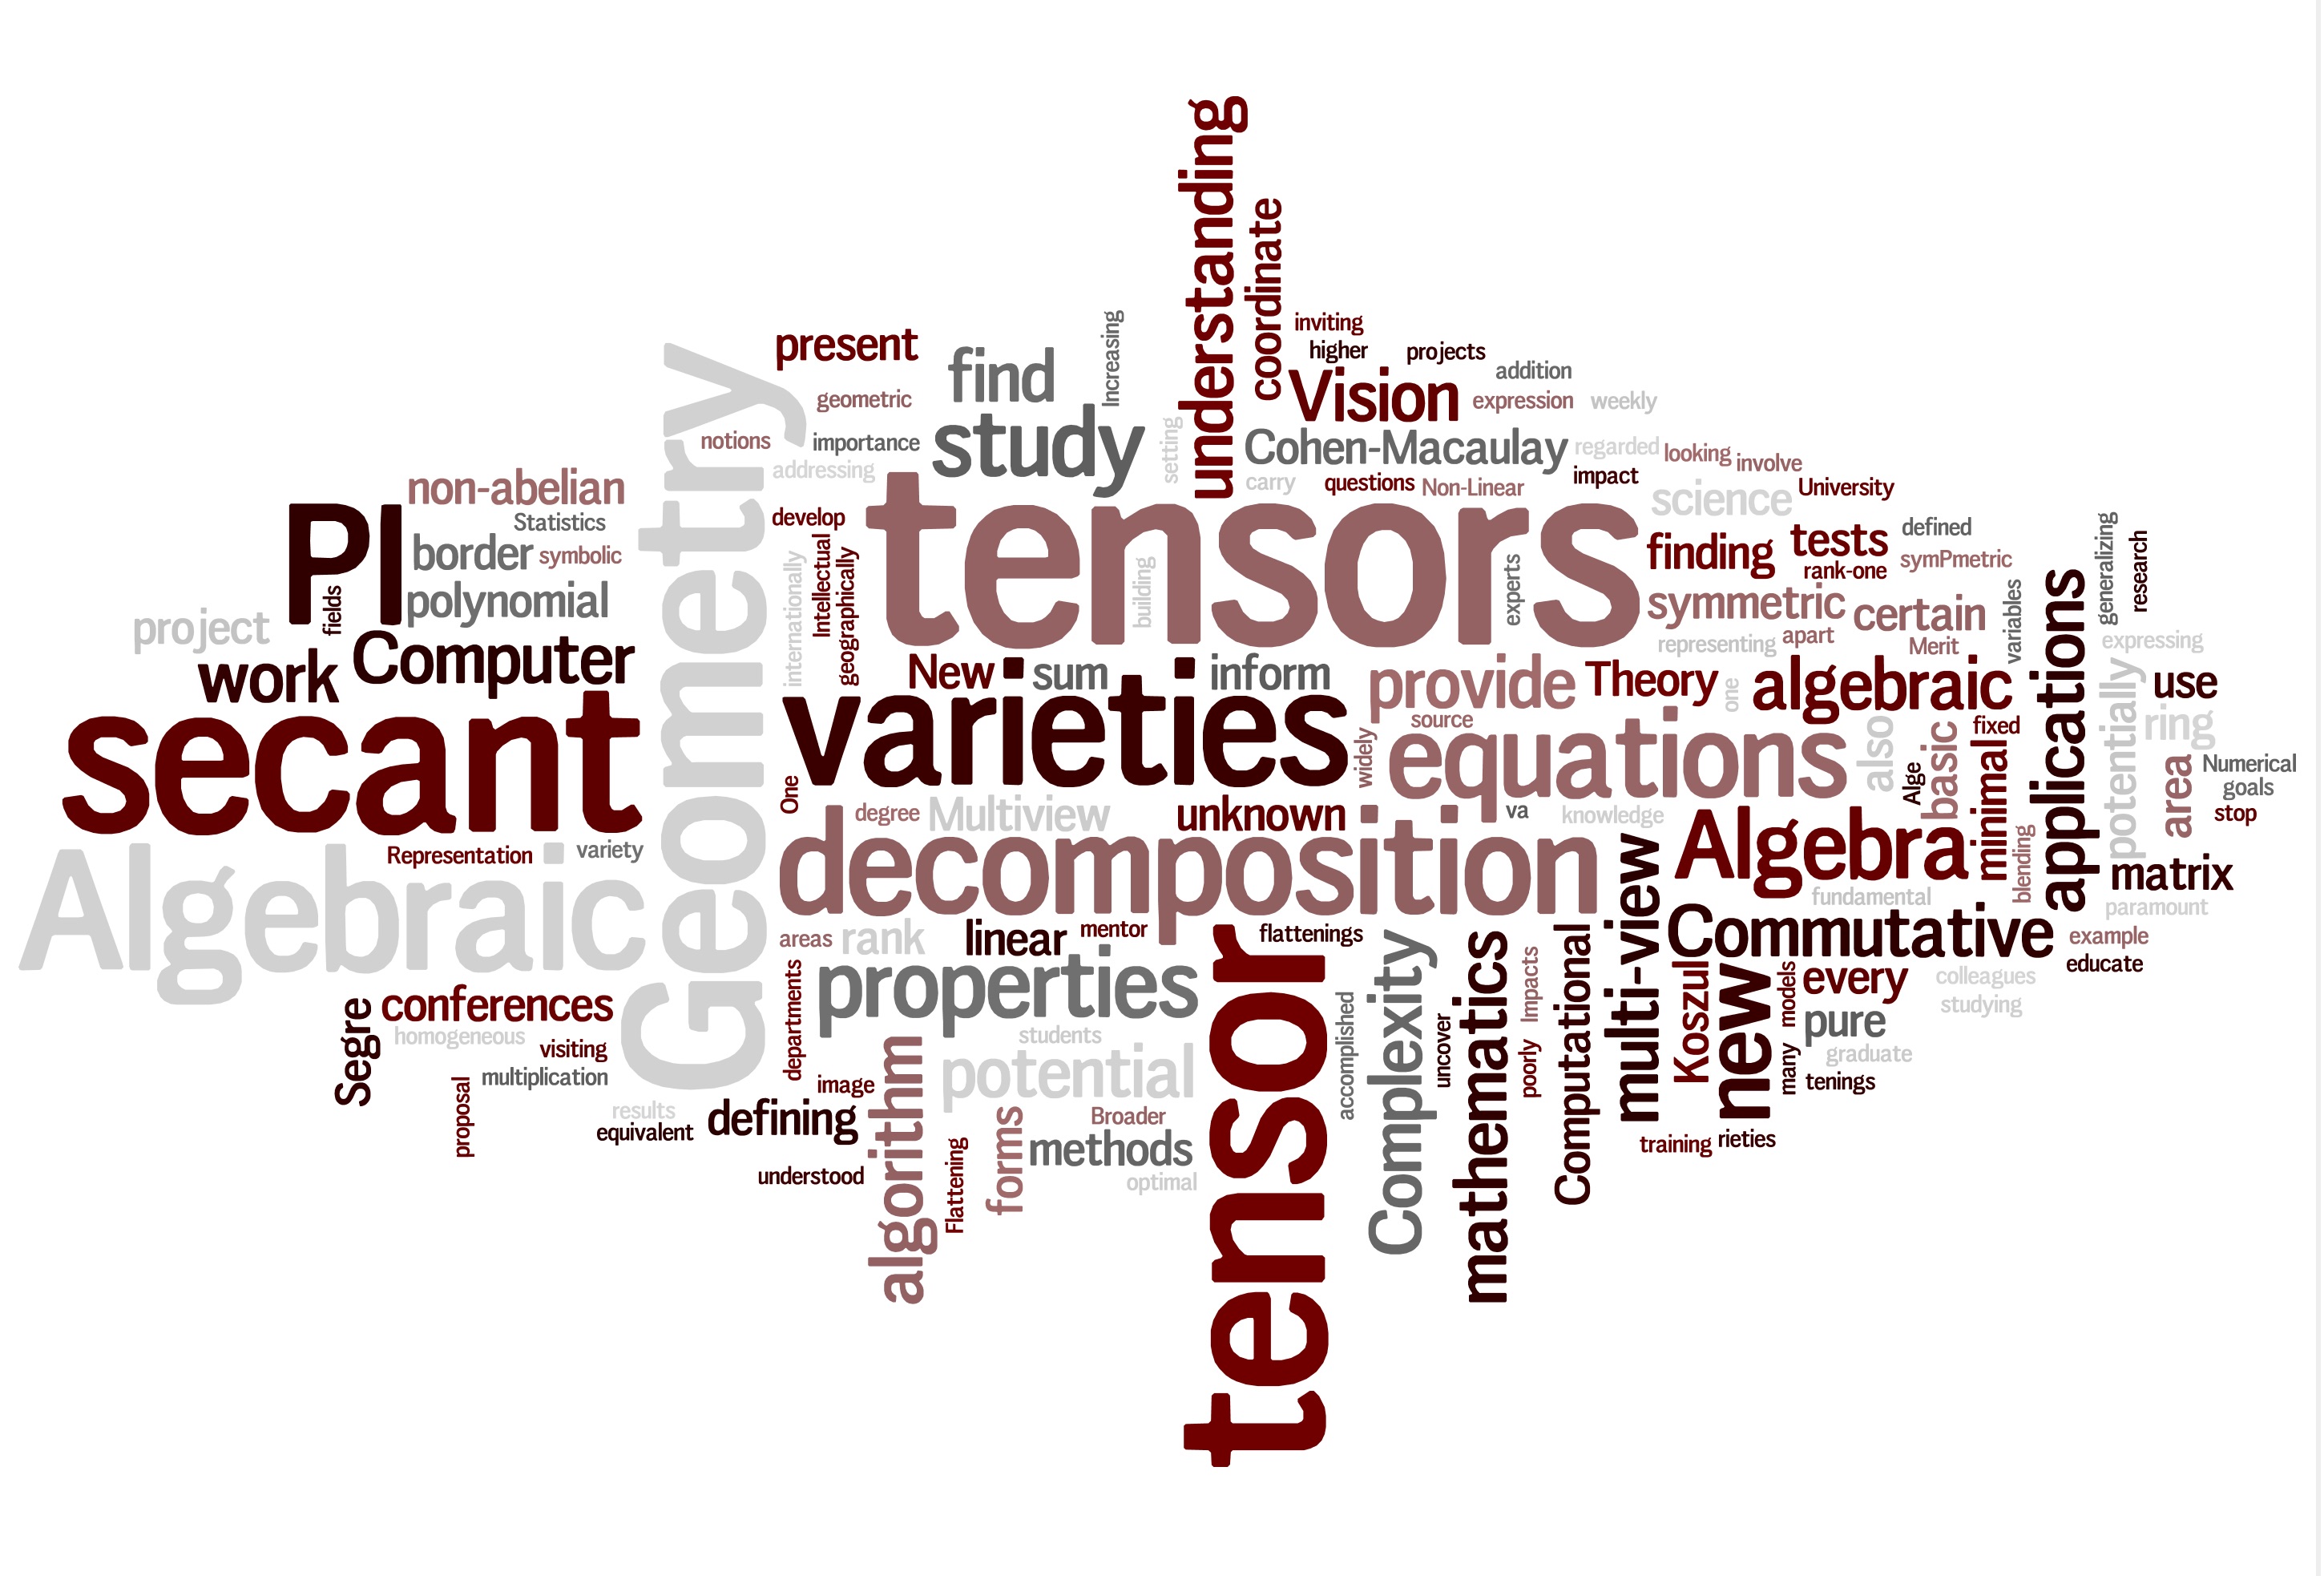 research word doodle from wordle.net